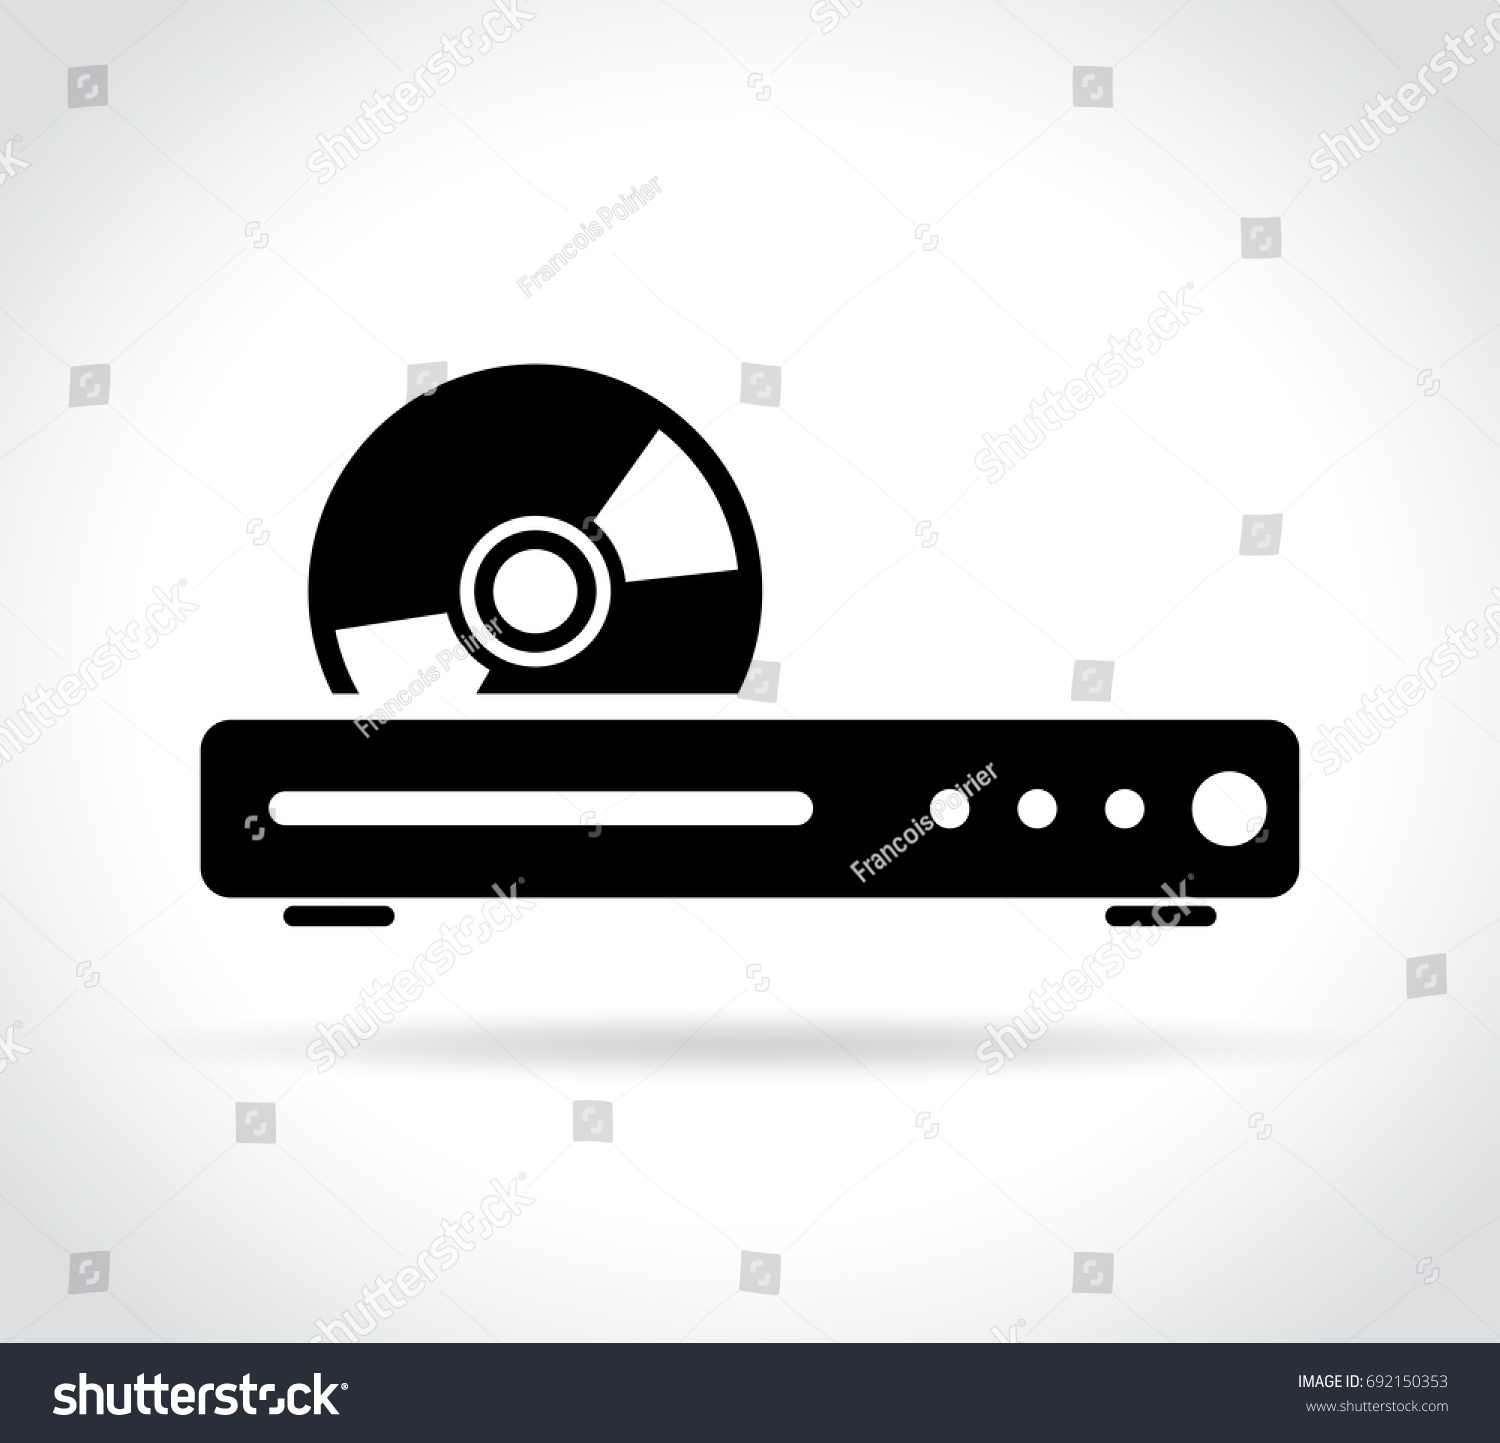 Cd, DVD, Compact Disk, Blue Ray Icon. Nine Buttons With Bright 